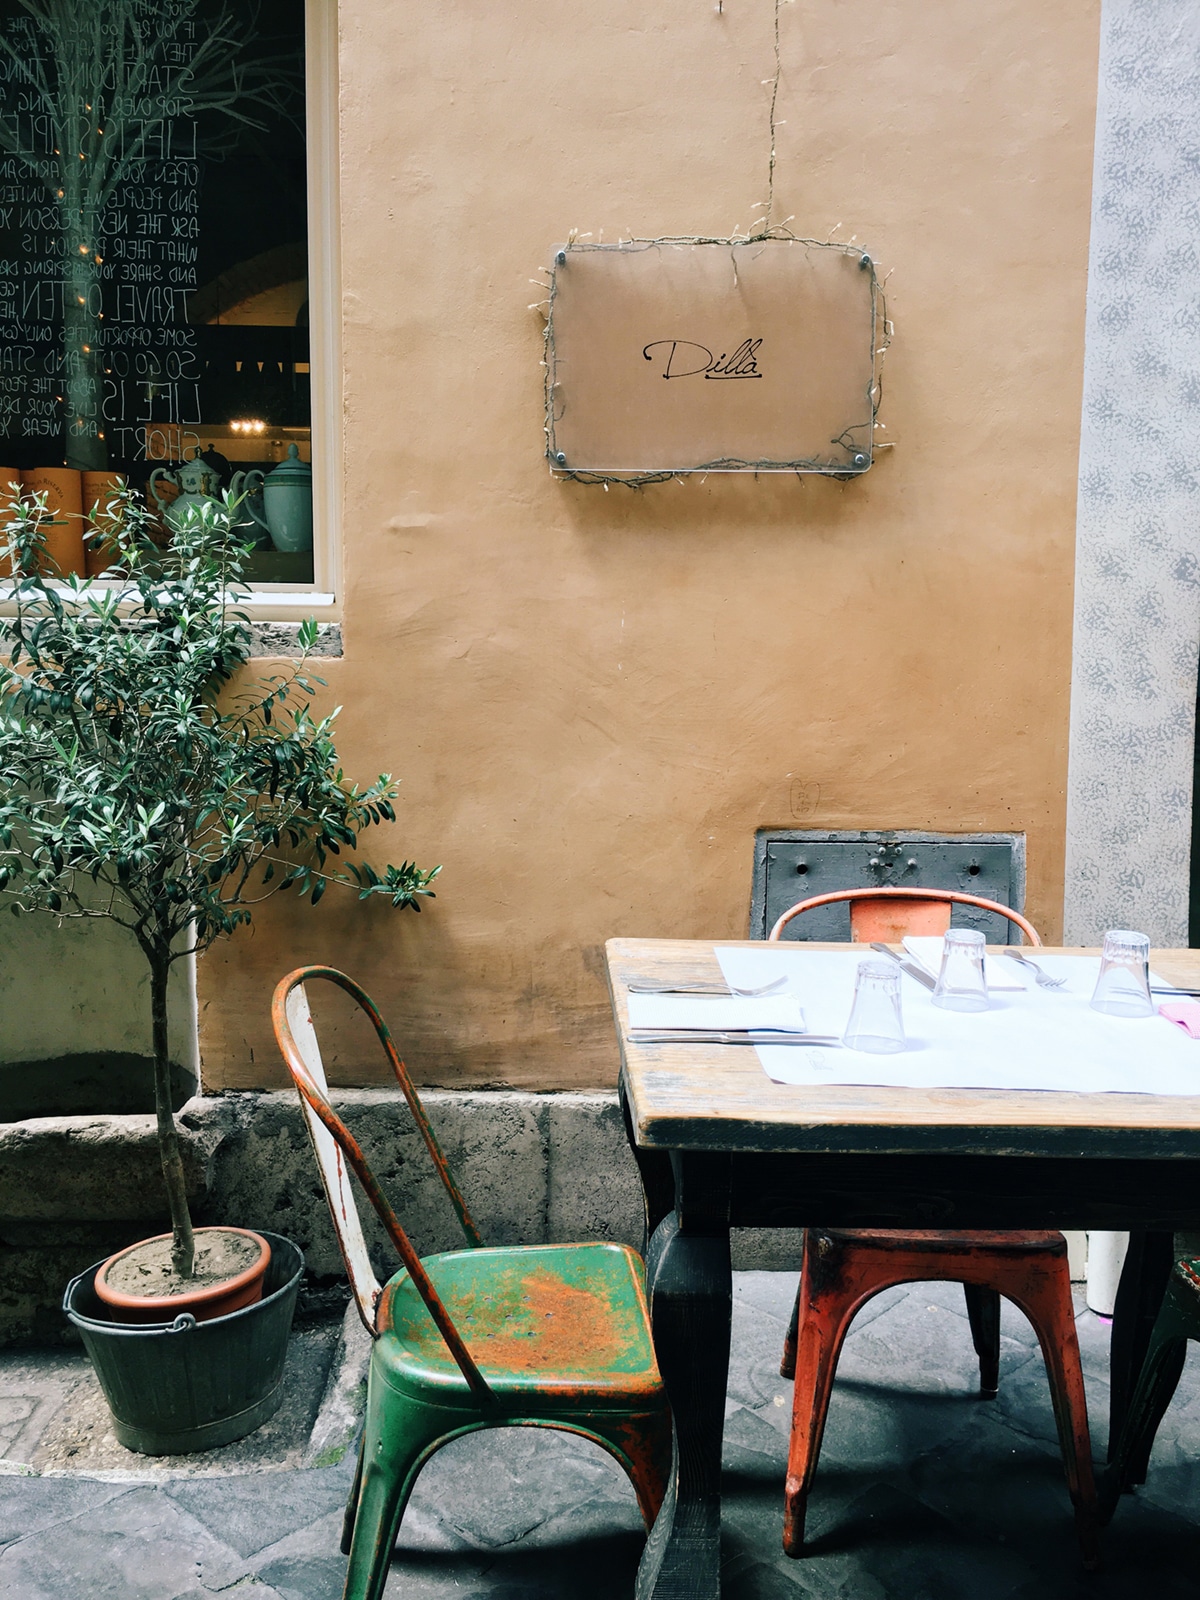 dilla restaurant | Rome travel guide from coco kelley